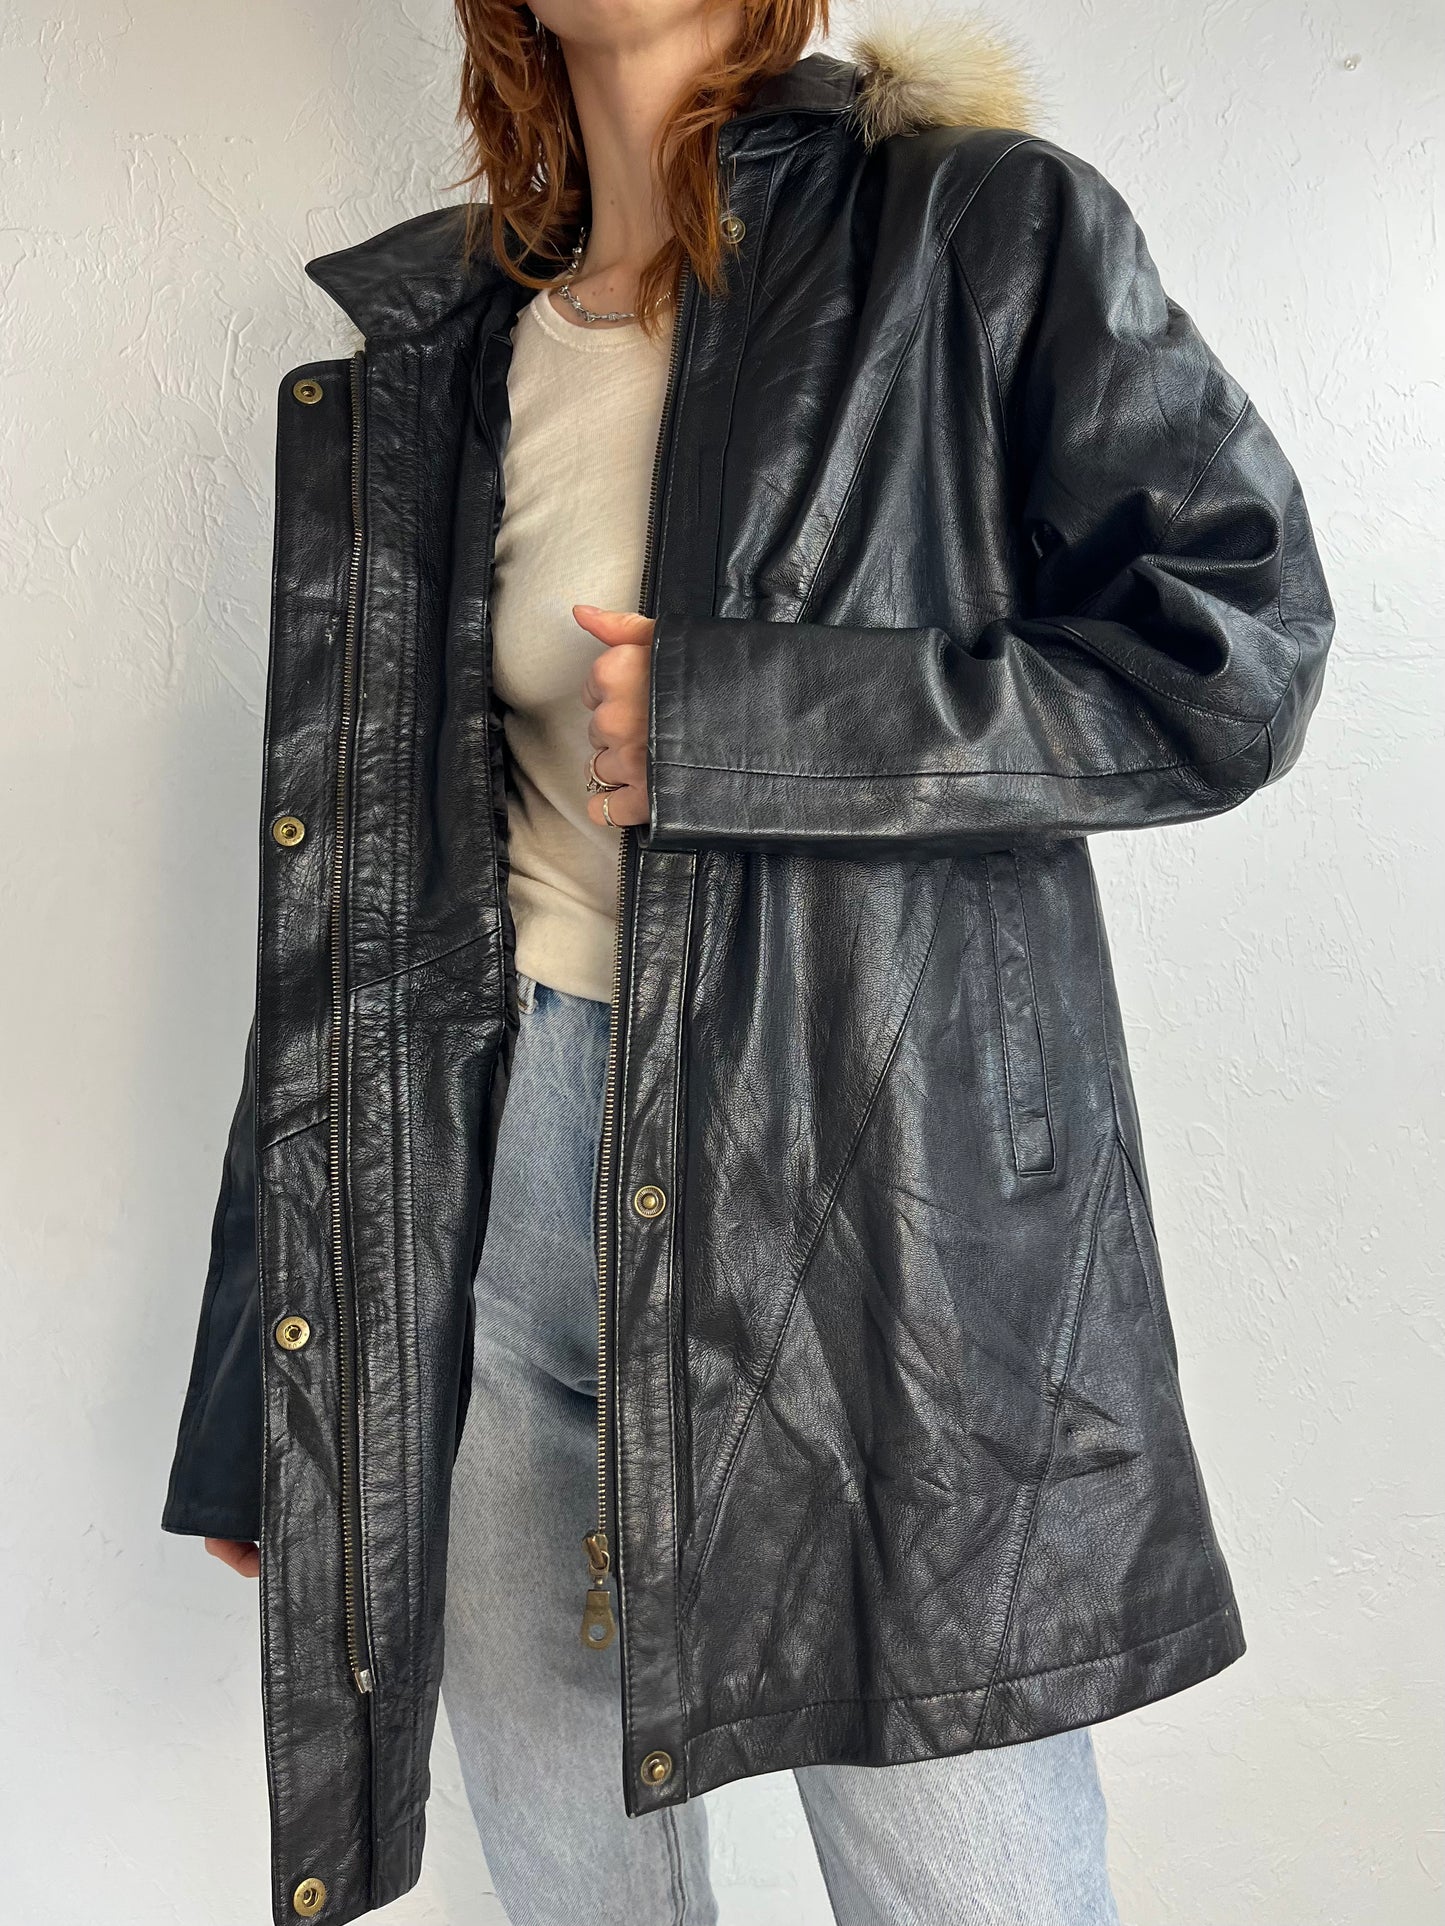 90s Y2K 'Paola Tocci' Black Leather Parka / Large